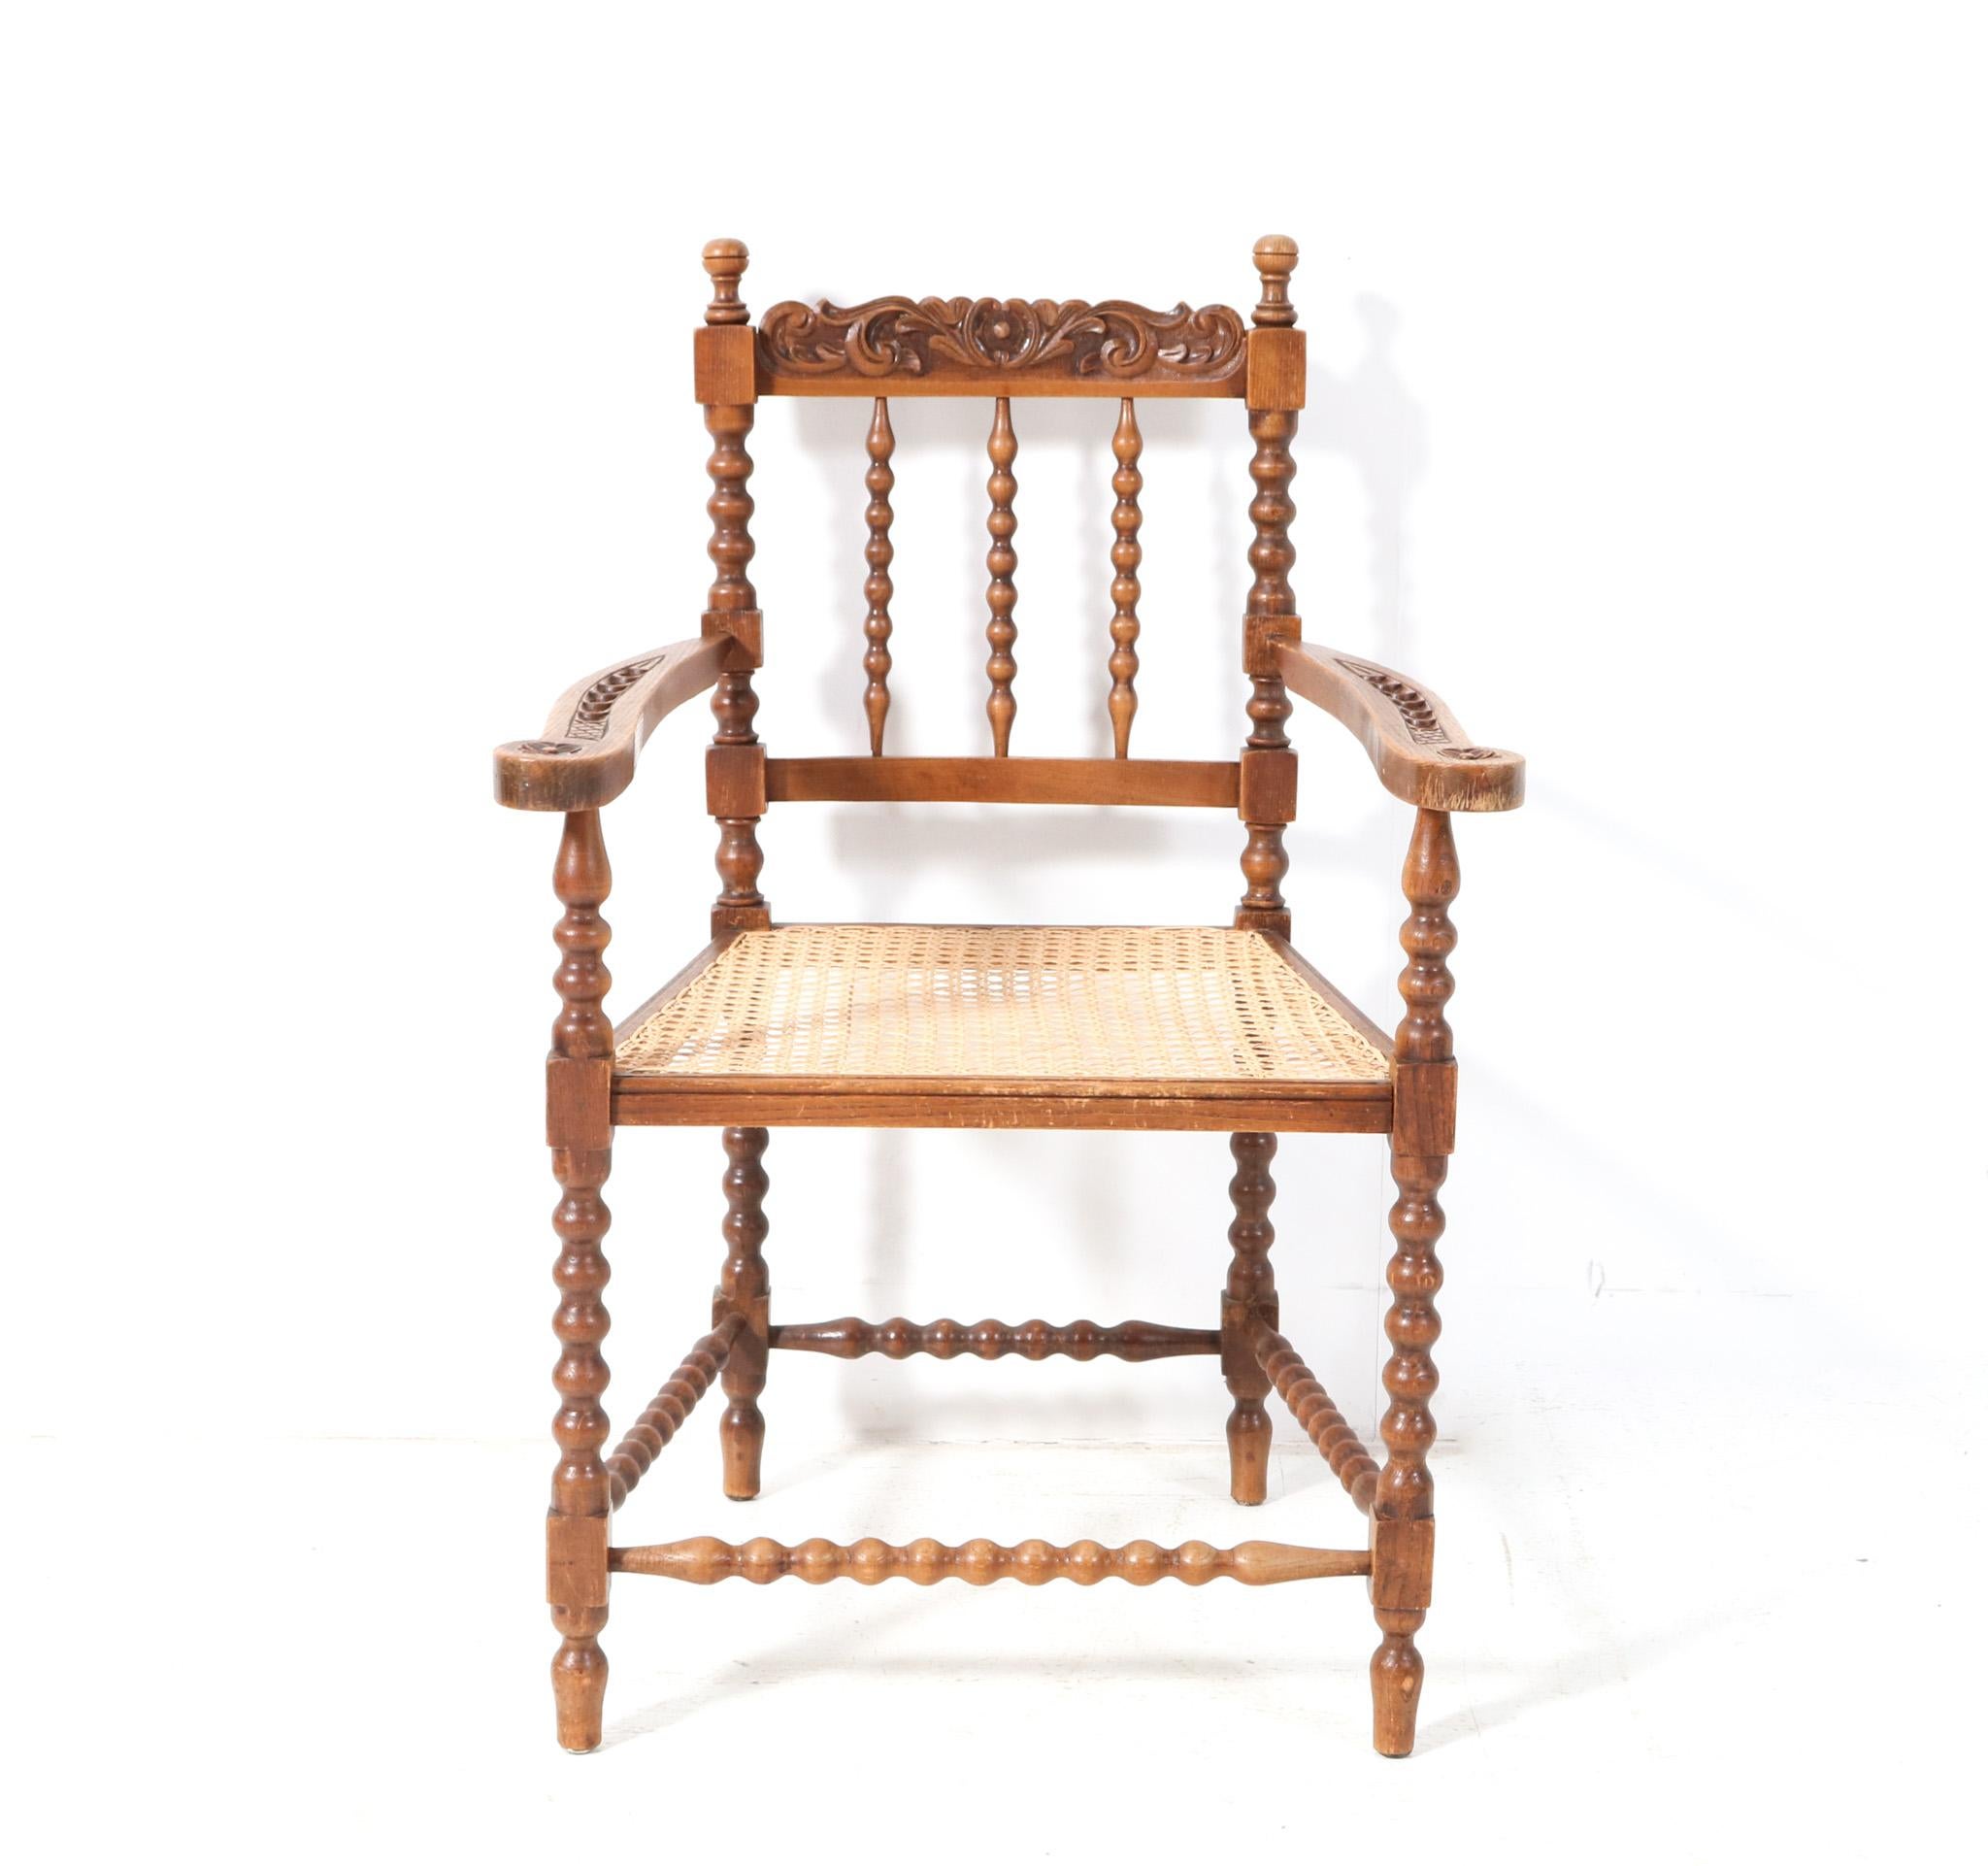 Stunning and rare Jacobean style bobbin armchair.
Striking Dutch design from the 1900s.
Solid hand-crafted stained beech frame with bobbin turned back, legs and supports.
With re-upholstered cane seat.
This wonderful Jacobean style bobbin armchair